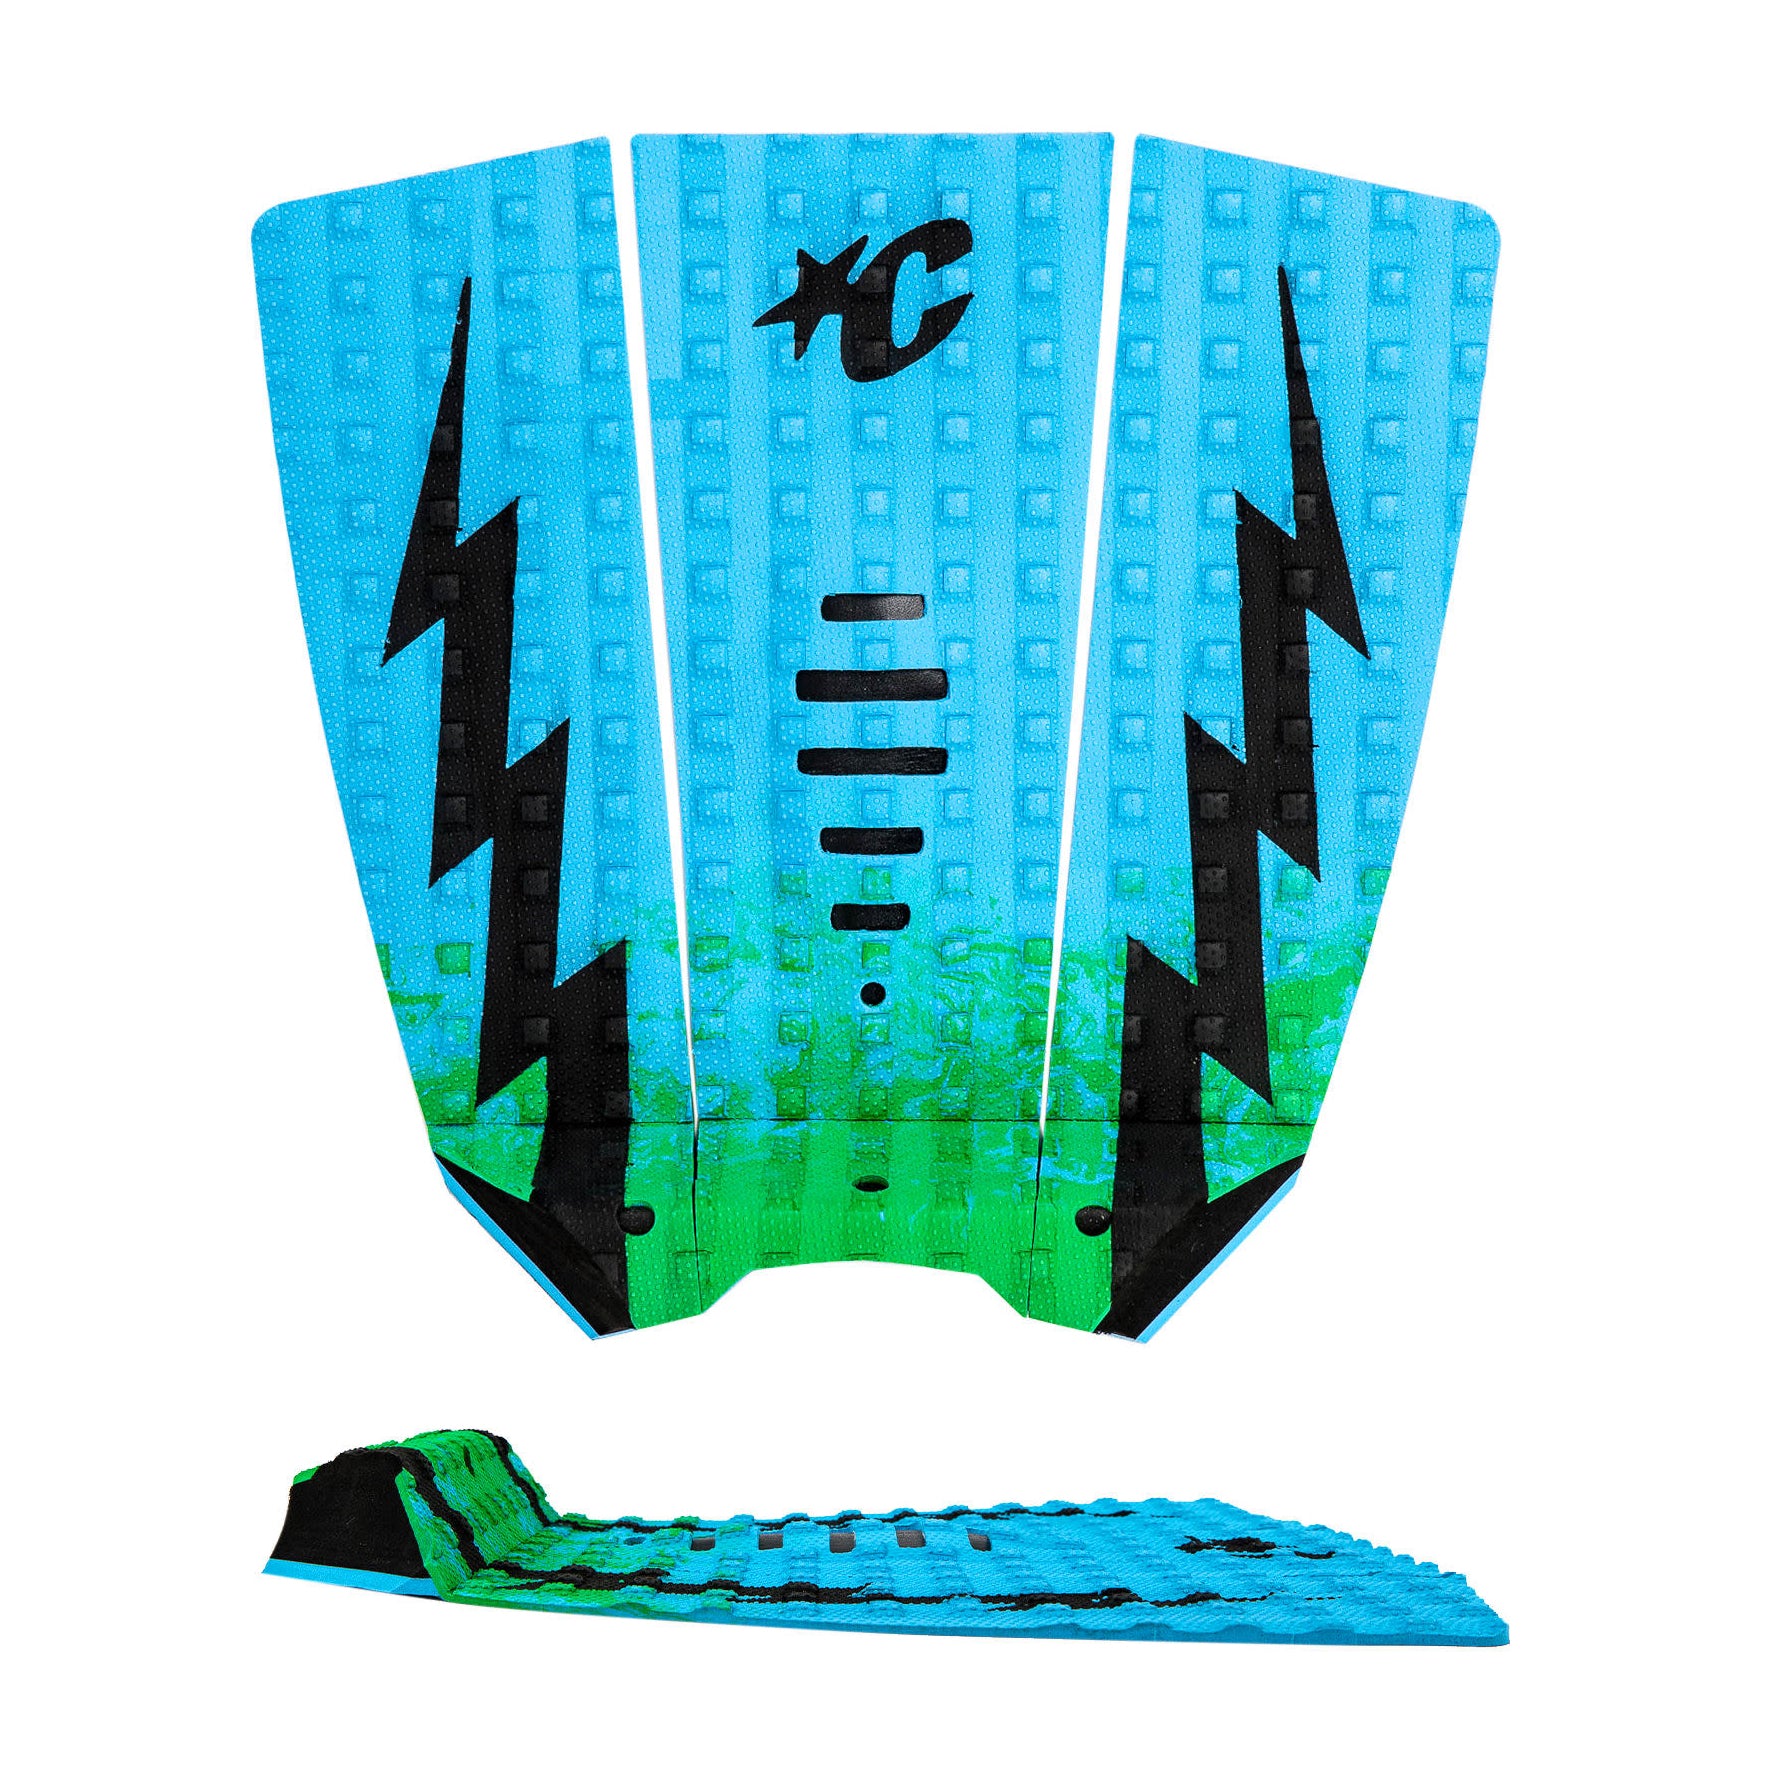 Creatures of Leisure Mick Eugene Fanning Lite Traction Pad Green Fade Cyan Black